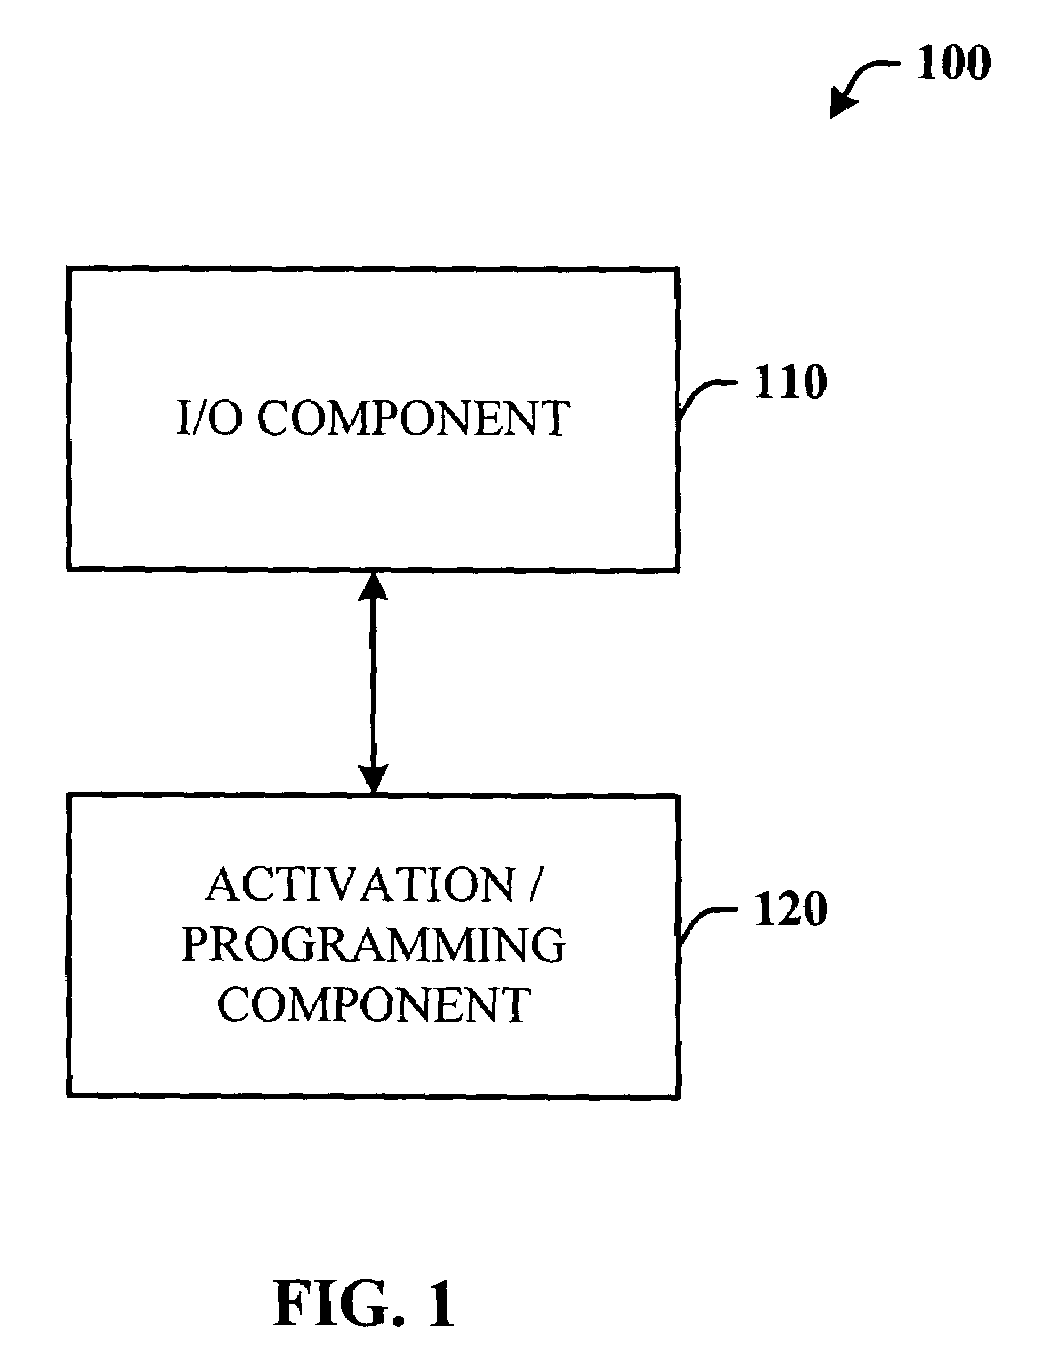 Remote programming/activation of SIM enabled ATA device